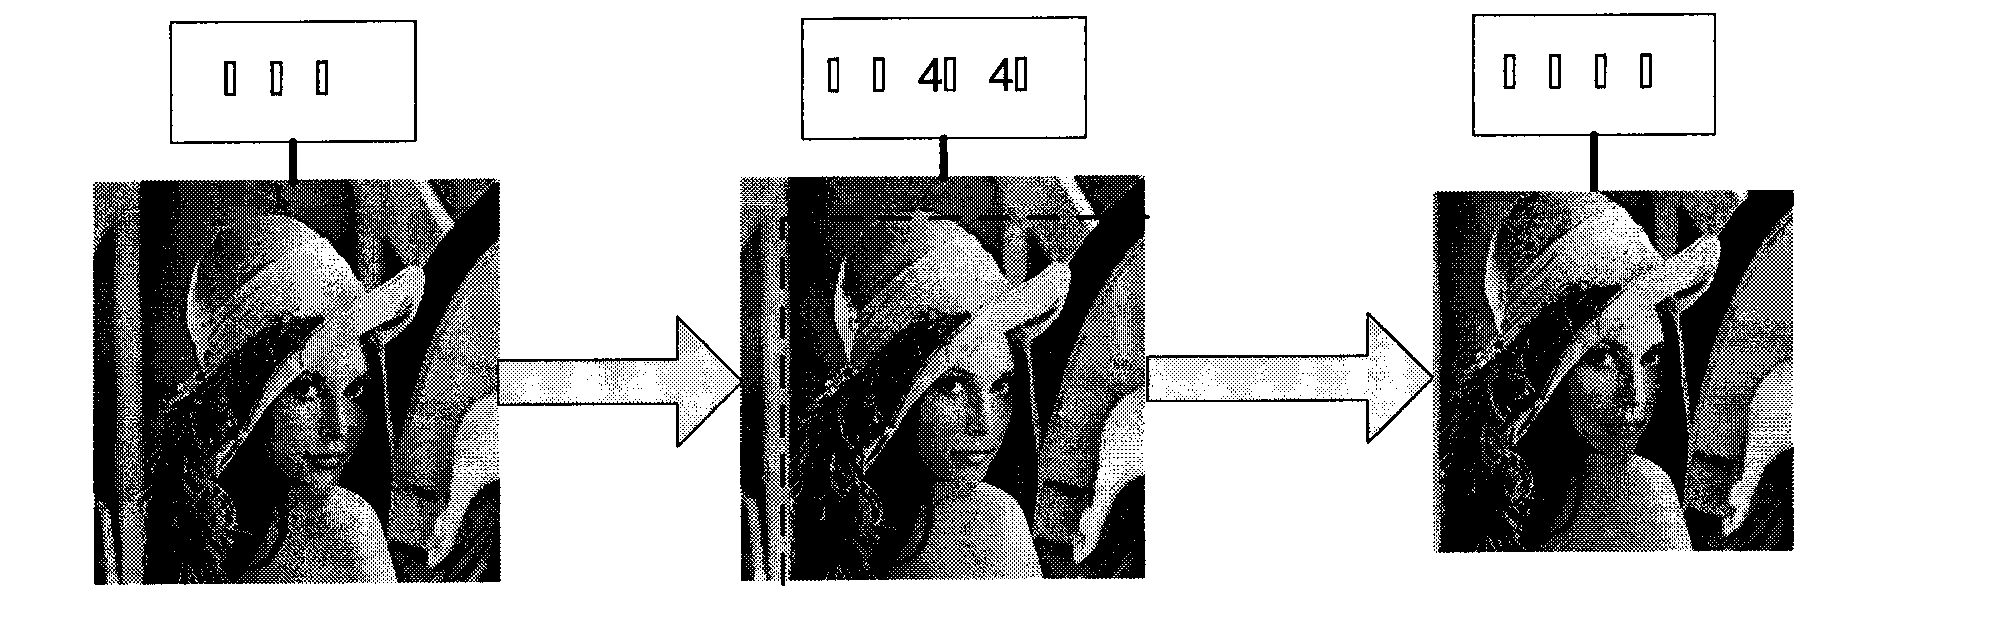 Method for testing compression history of BMP image based on loss amount of image information